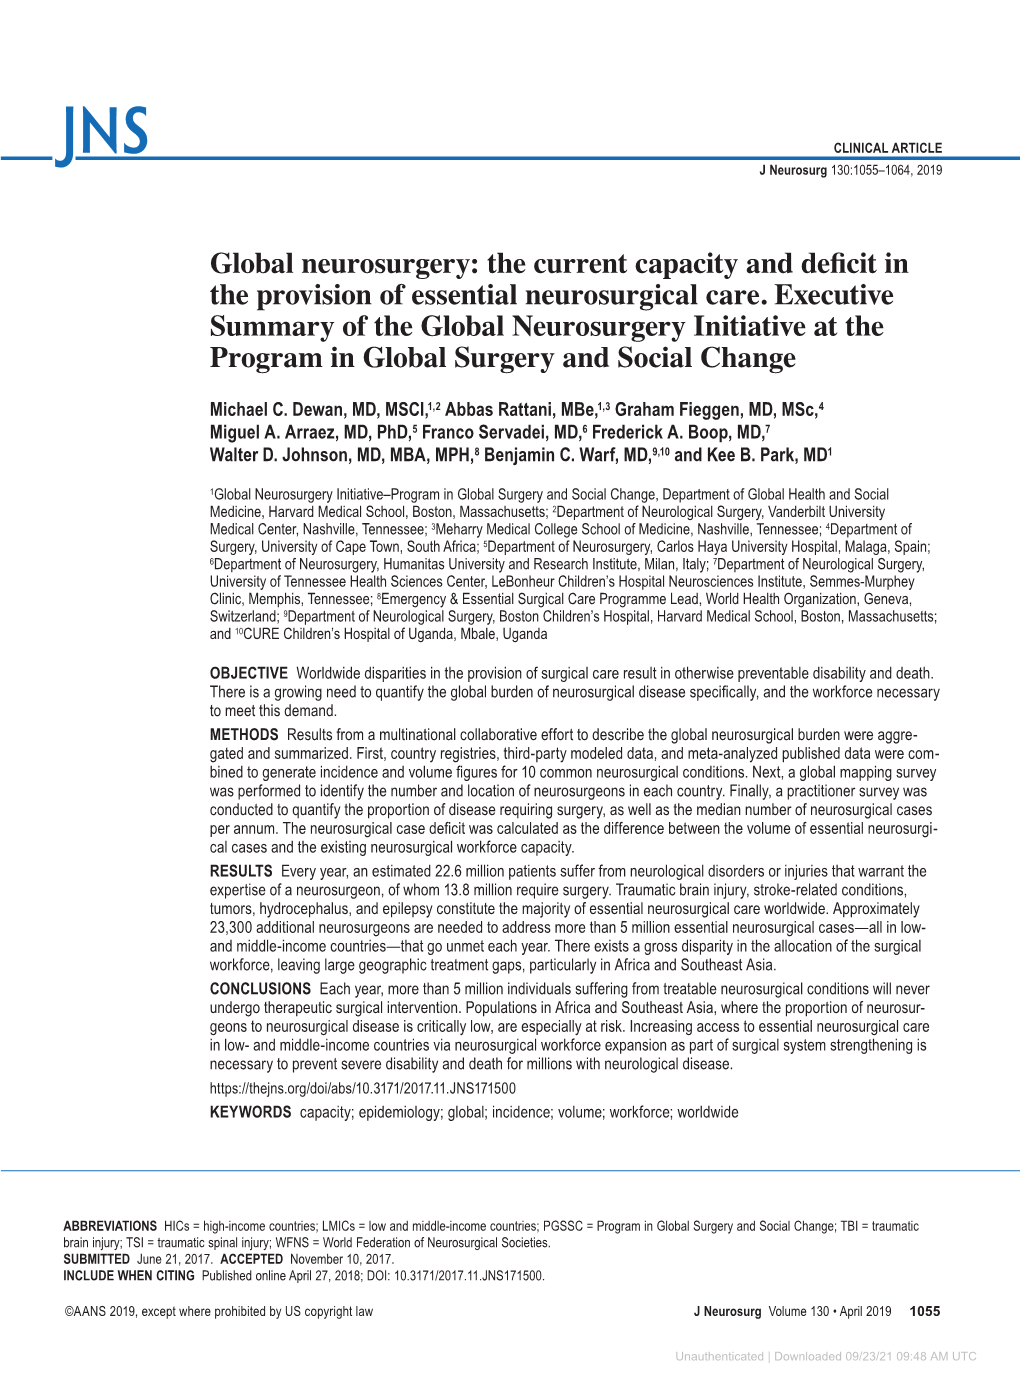 Global Neurosurgery: the Current Capacity and Deficit in the Provision of Essential Neurosurgical Care